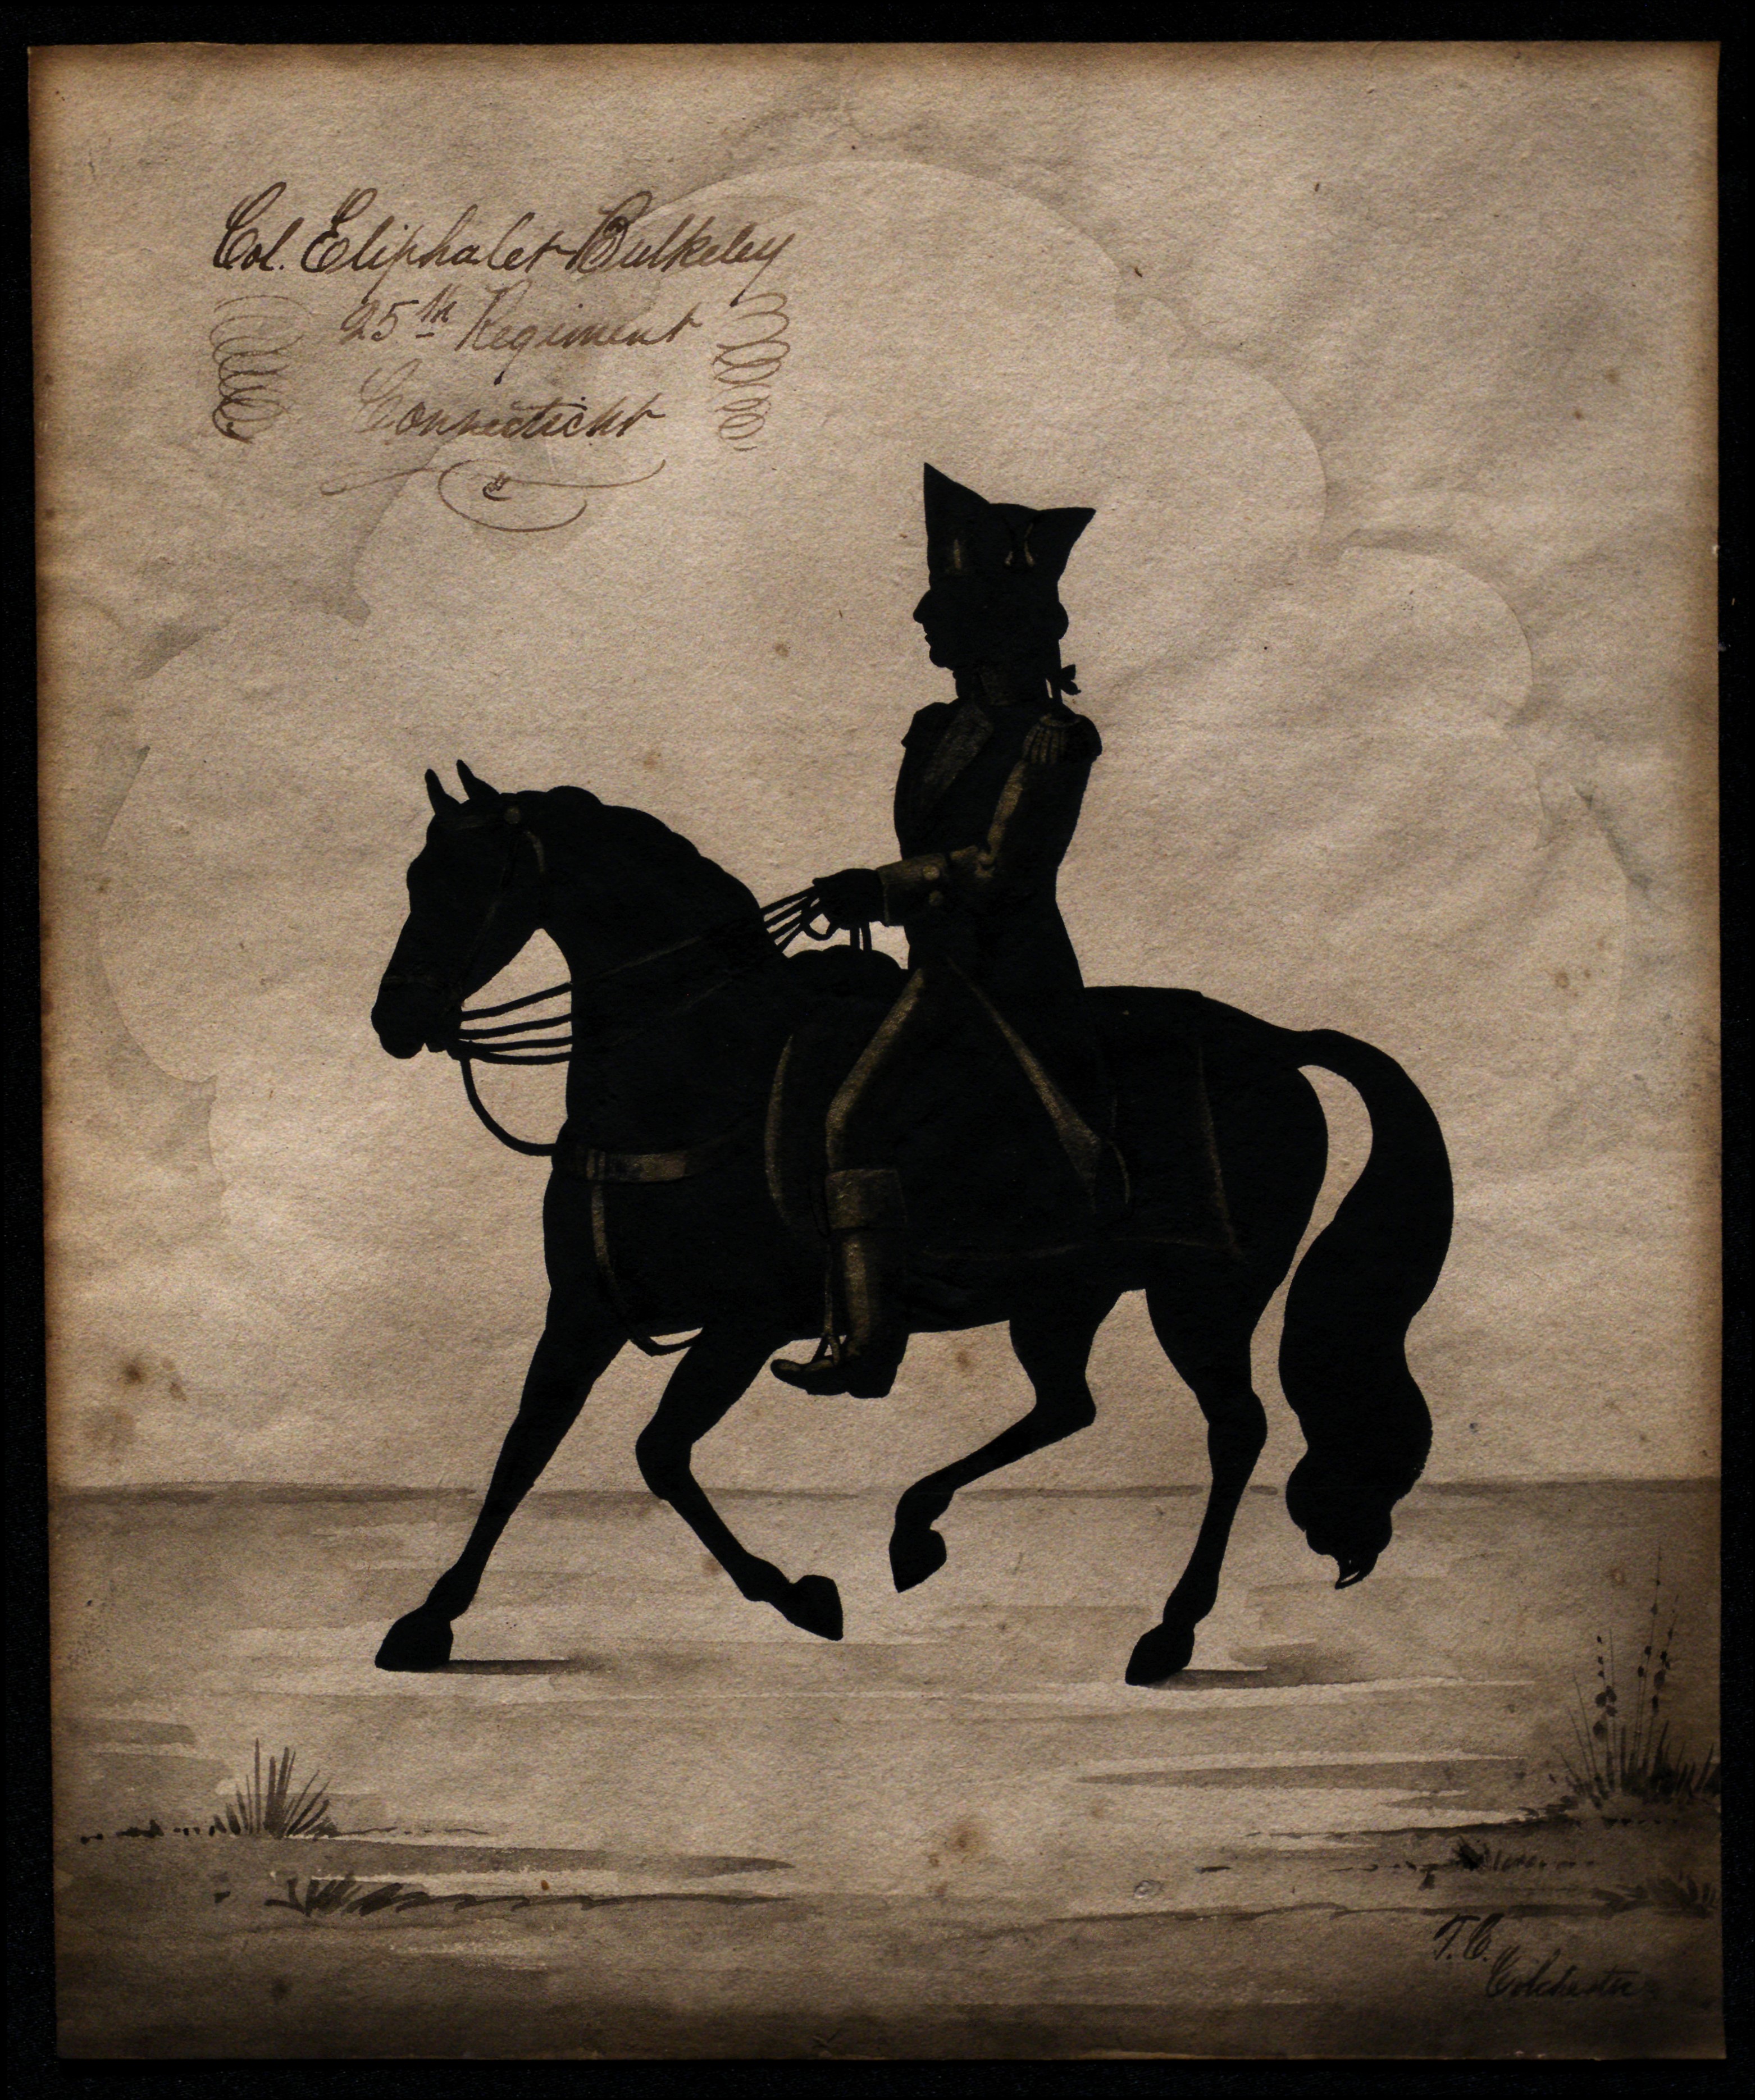 Silhouette image of Colonel Eliphalet Bulkeley on horseback, created by T.C. Colchester between 1770 and 1780. Bulkeley served in the 25th Connecticut Regiment in the Revolutionary War. (The Gilder Lehrman Institute, GLC01450.041)